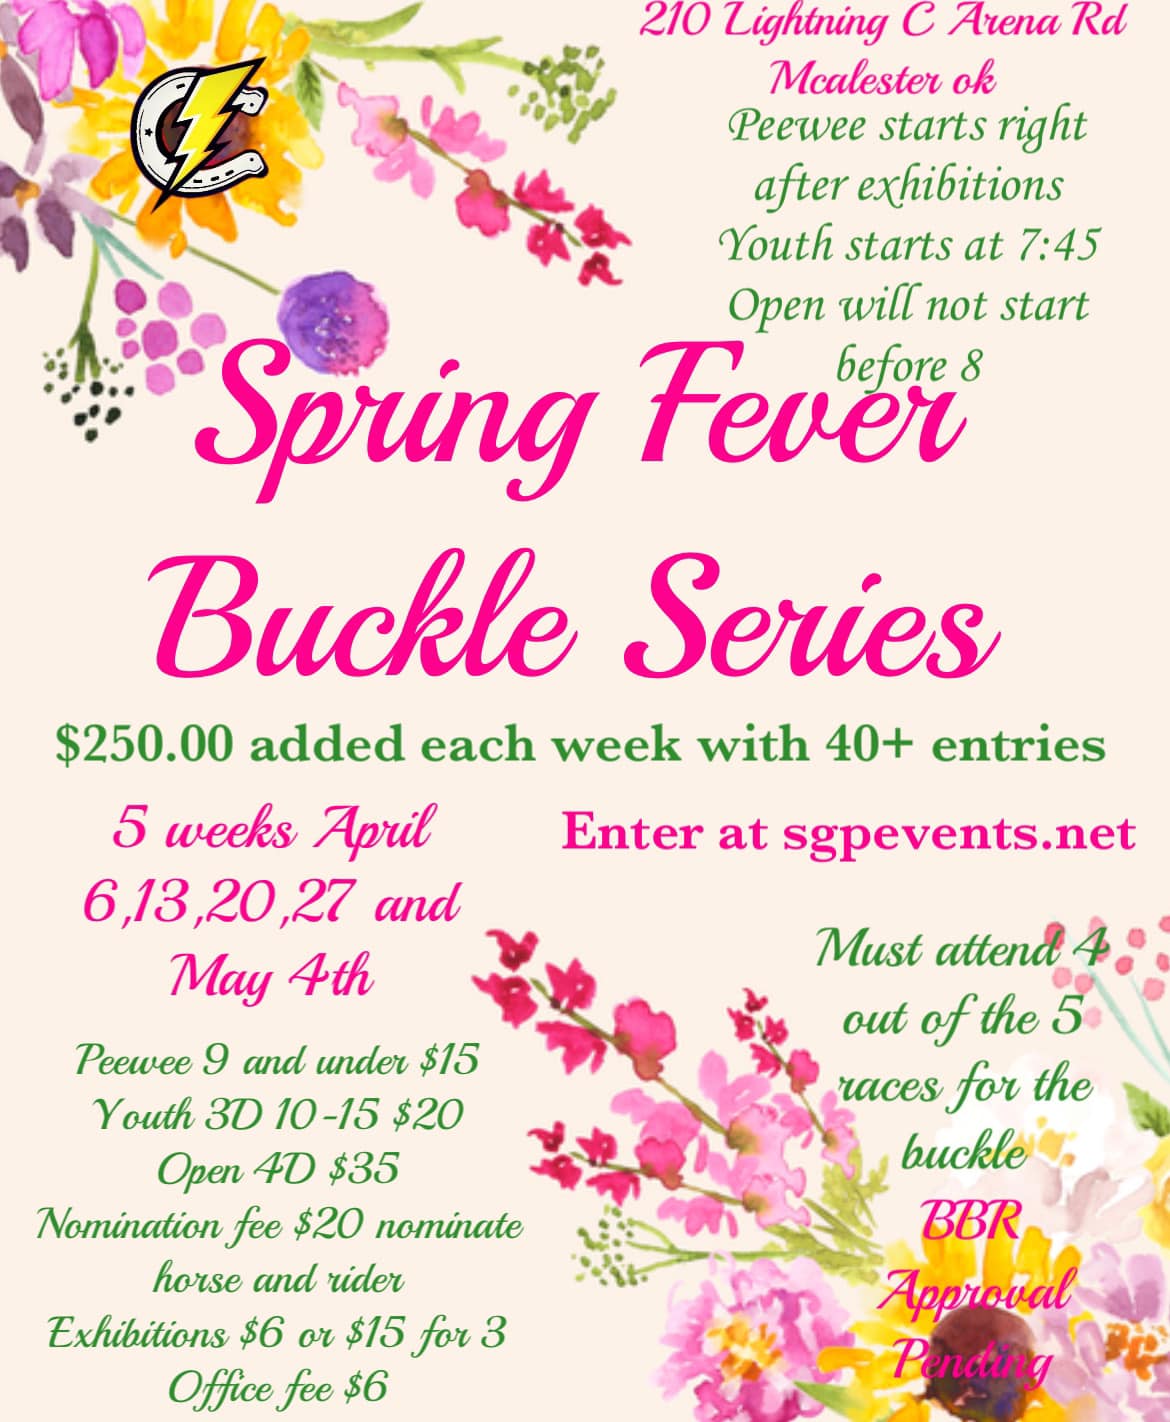 Spring Fever Buckle Series